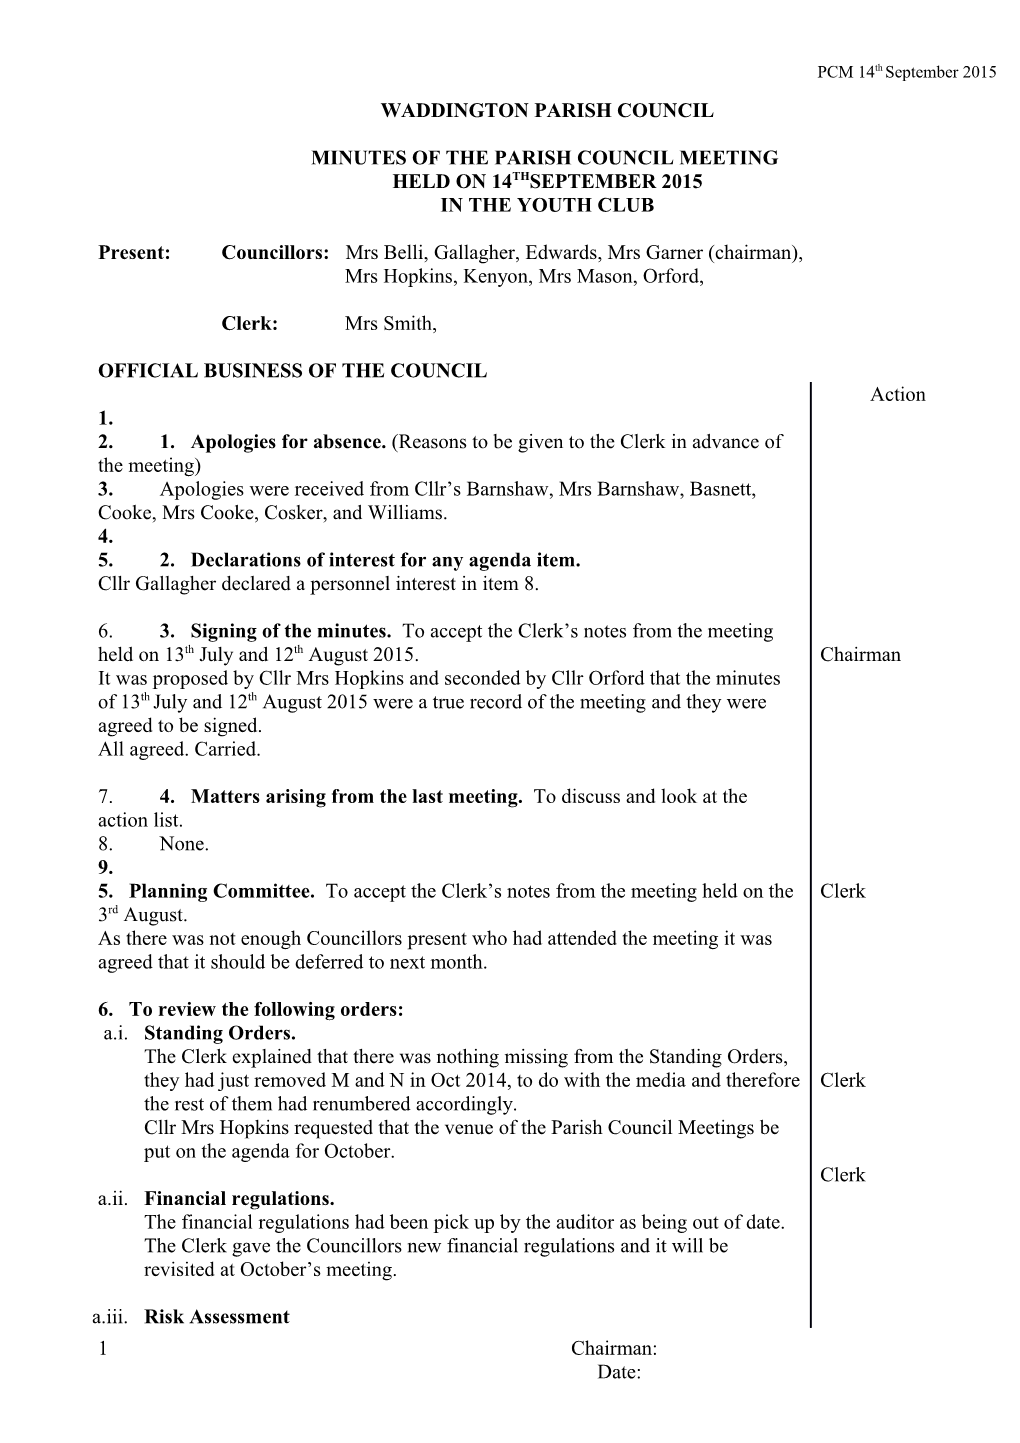 Minutes of the Parish Council Meeting s4